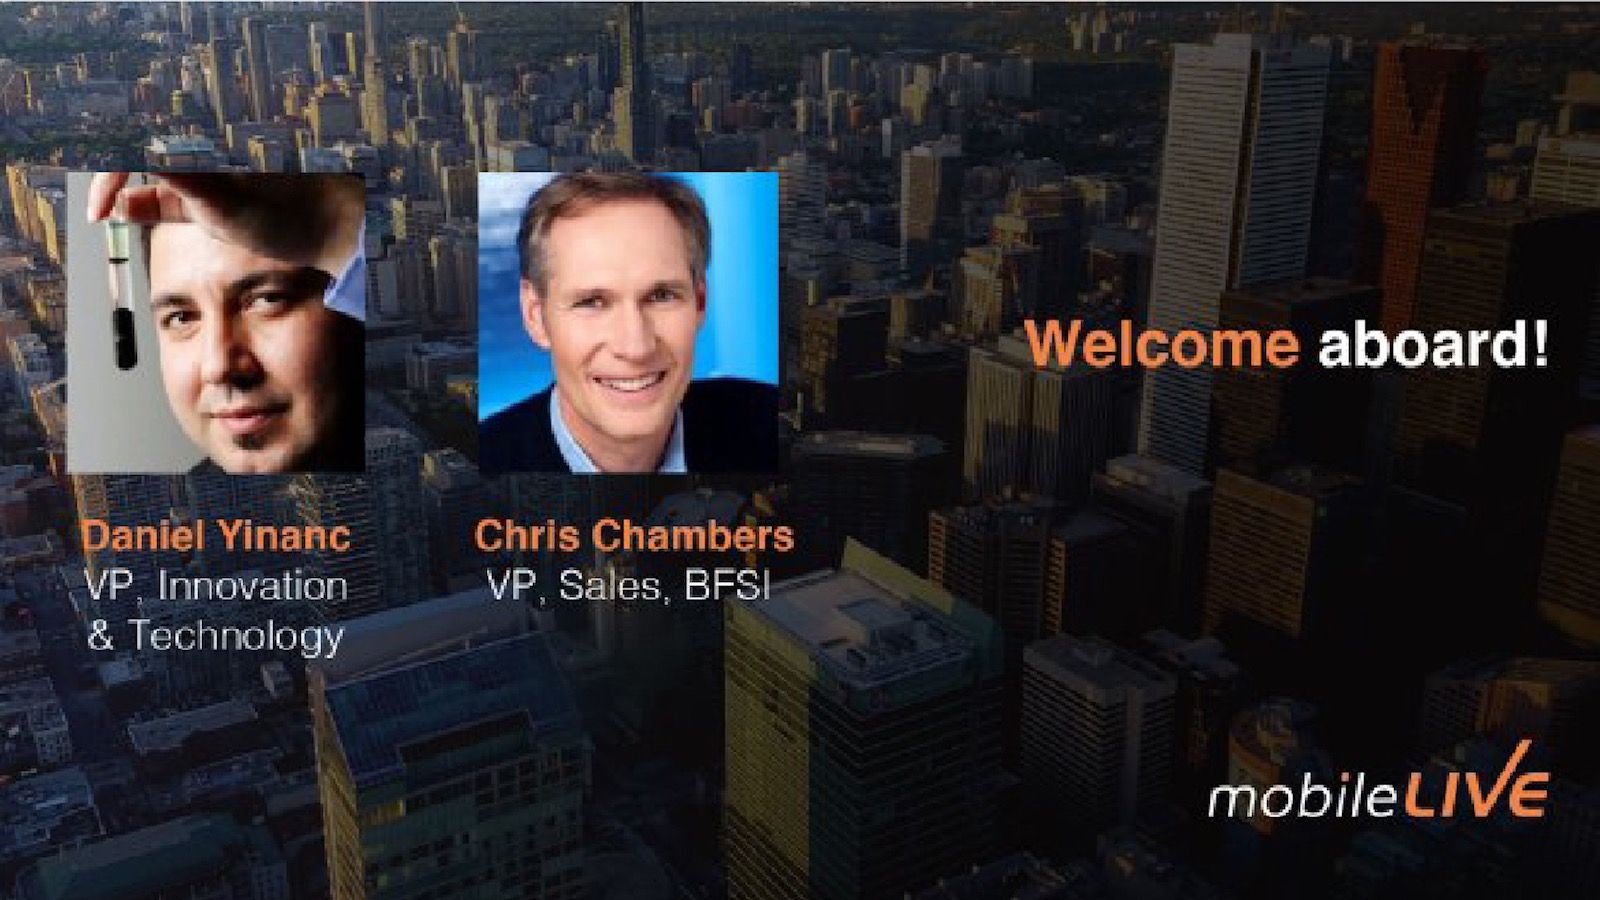 Two new VPs being welcomed to mobileLIVE